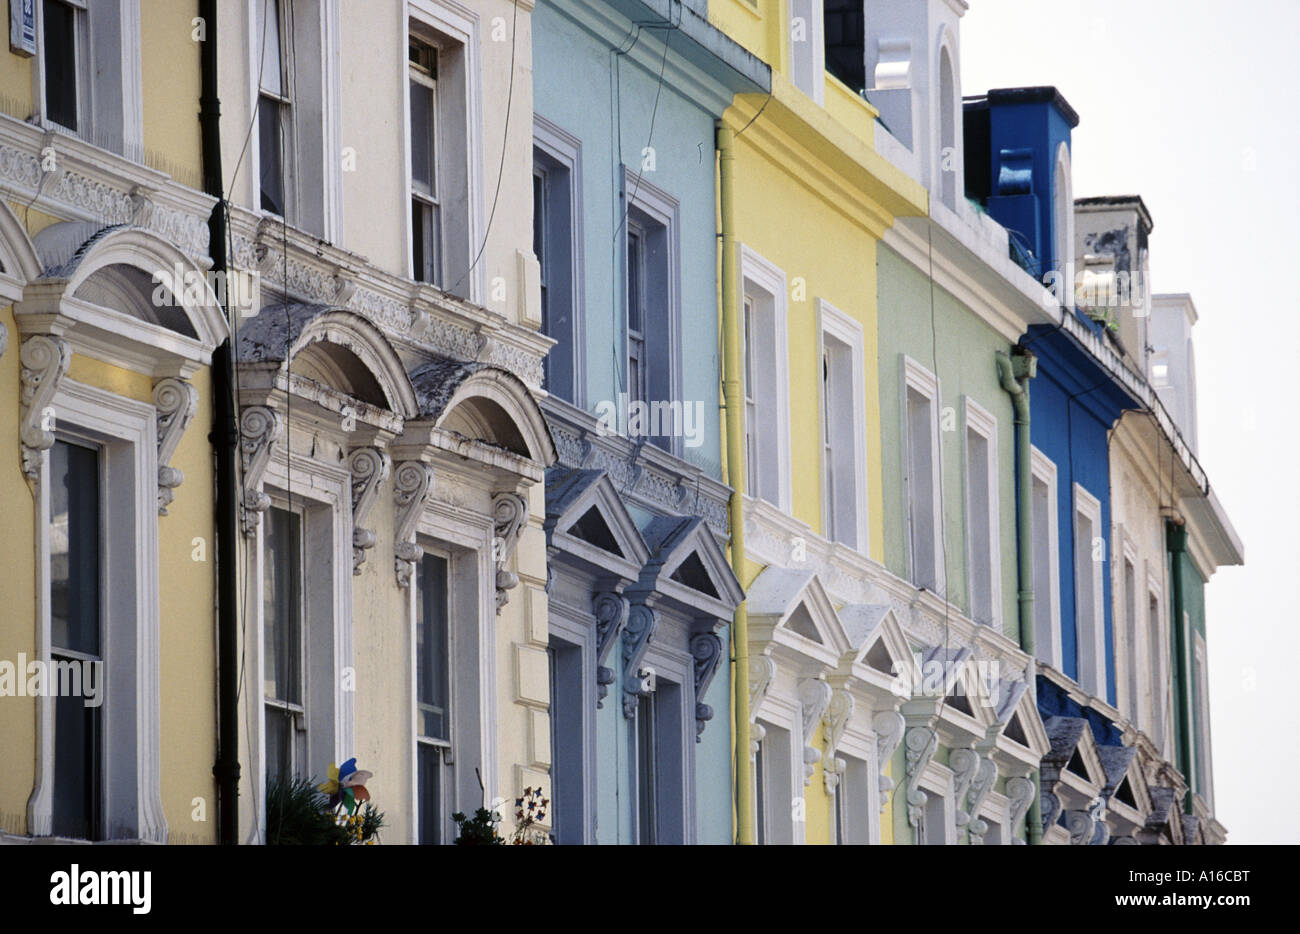 Colourful facade of a residential street in Notting Hill London W11 an upmarket and trendy neighbourhood Stock Photo